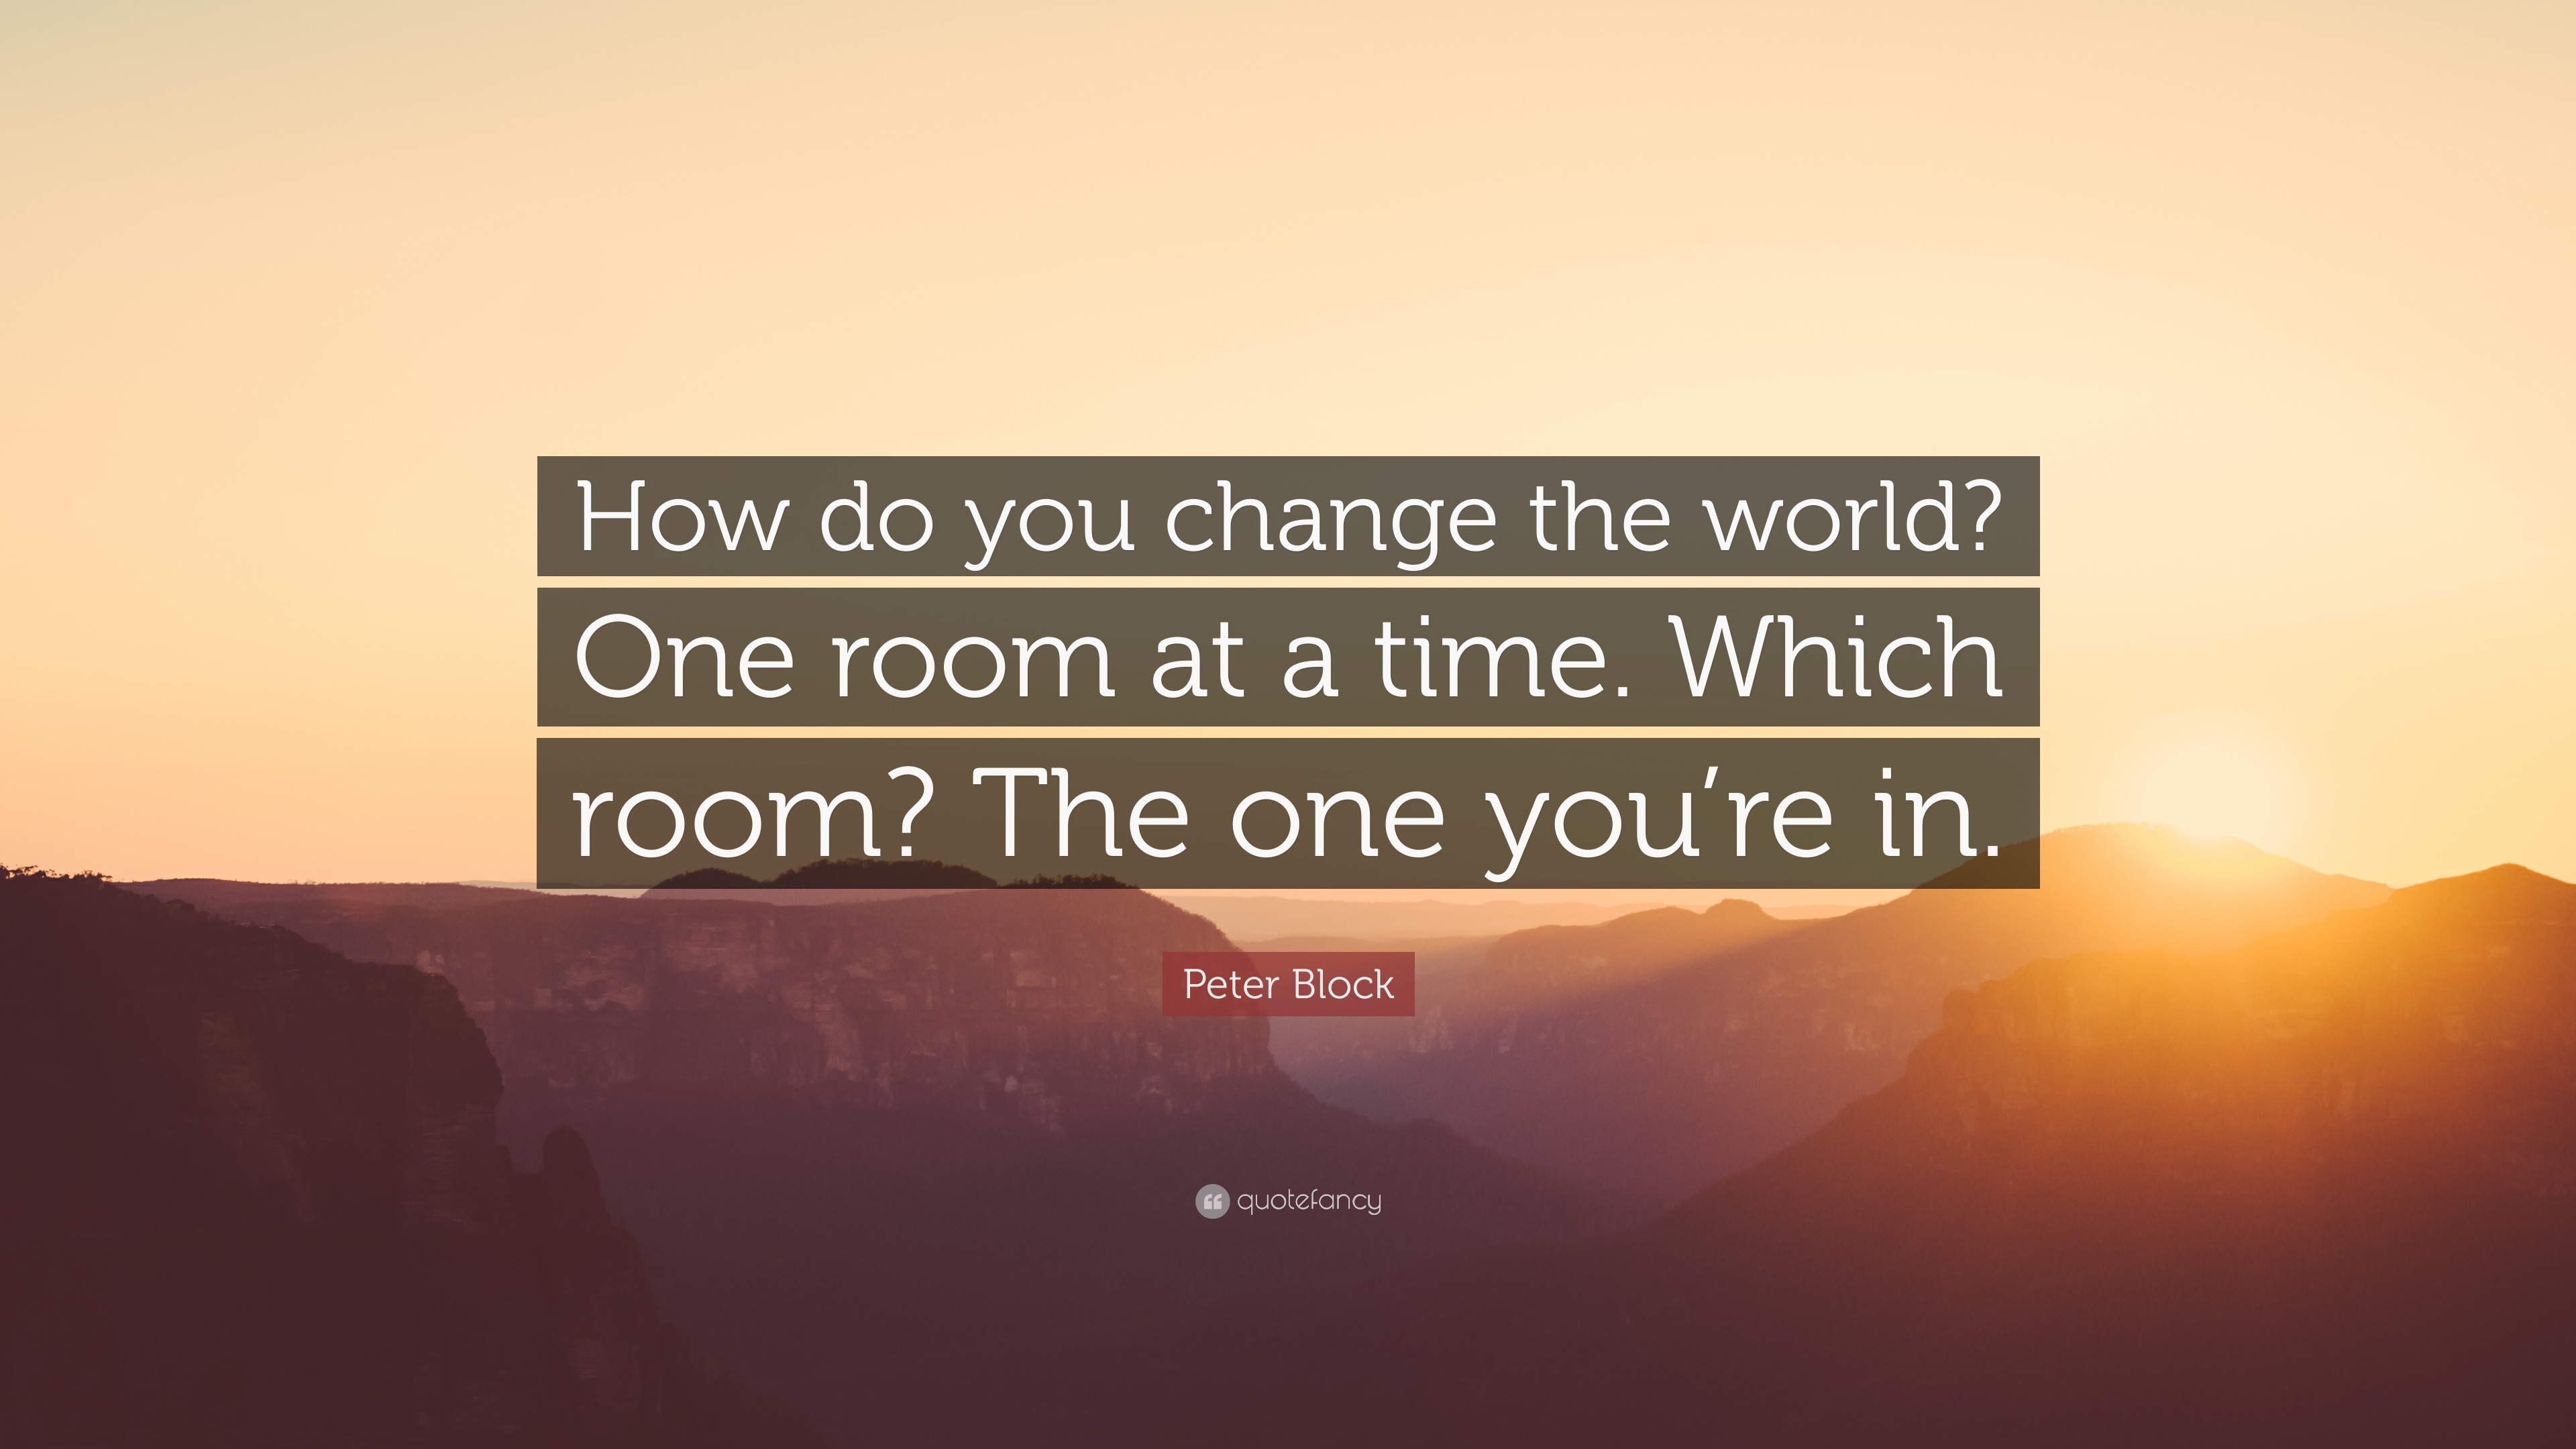 Peter Block Quote: “How do you change the world? One room at a